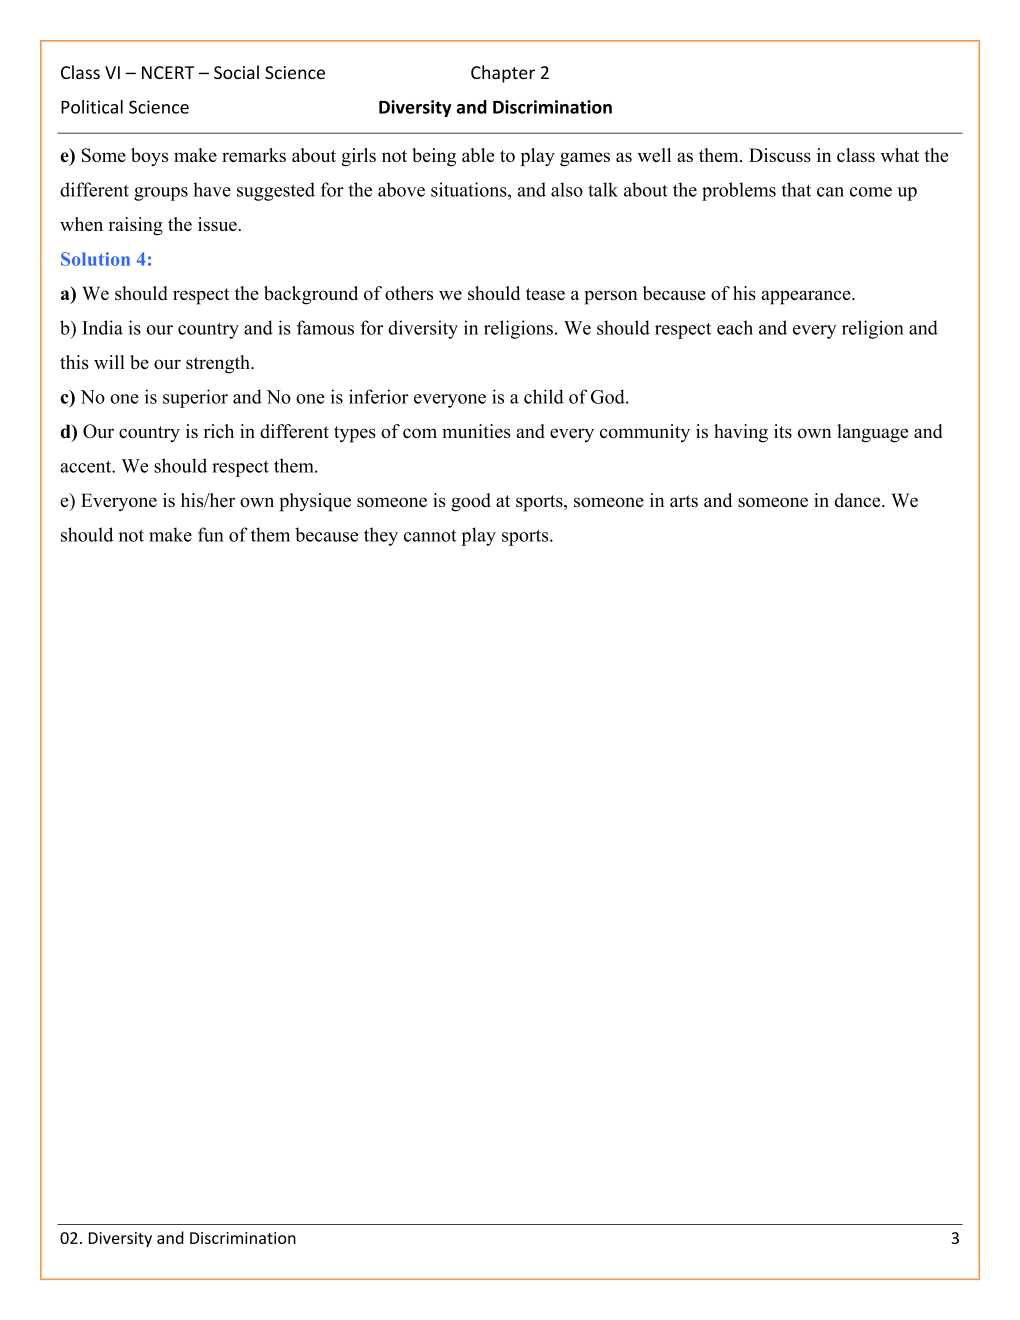 NCERT Solutions For Class 6 Social Science - Social and Political Life Chapter 2